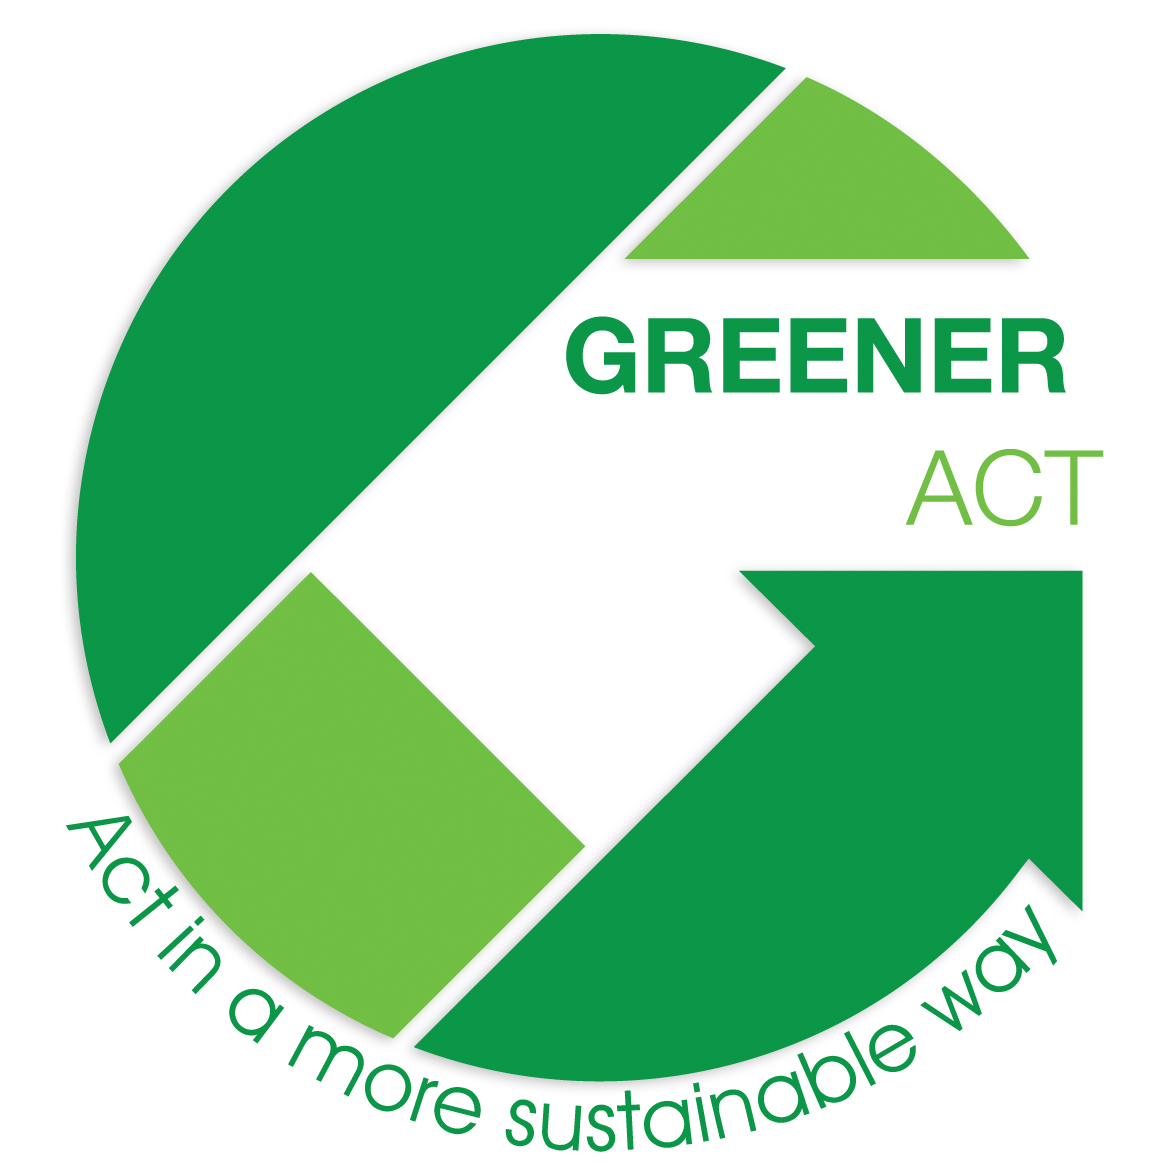 Greener Act TRAVEL & ACT in a more SUSTAINABLE way